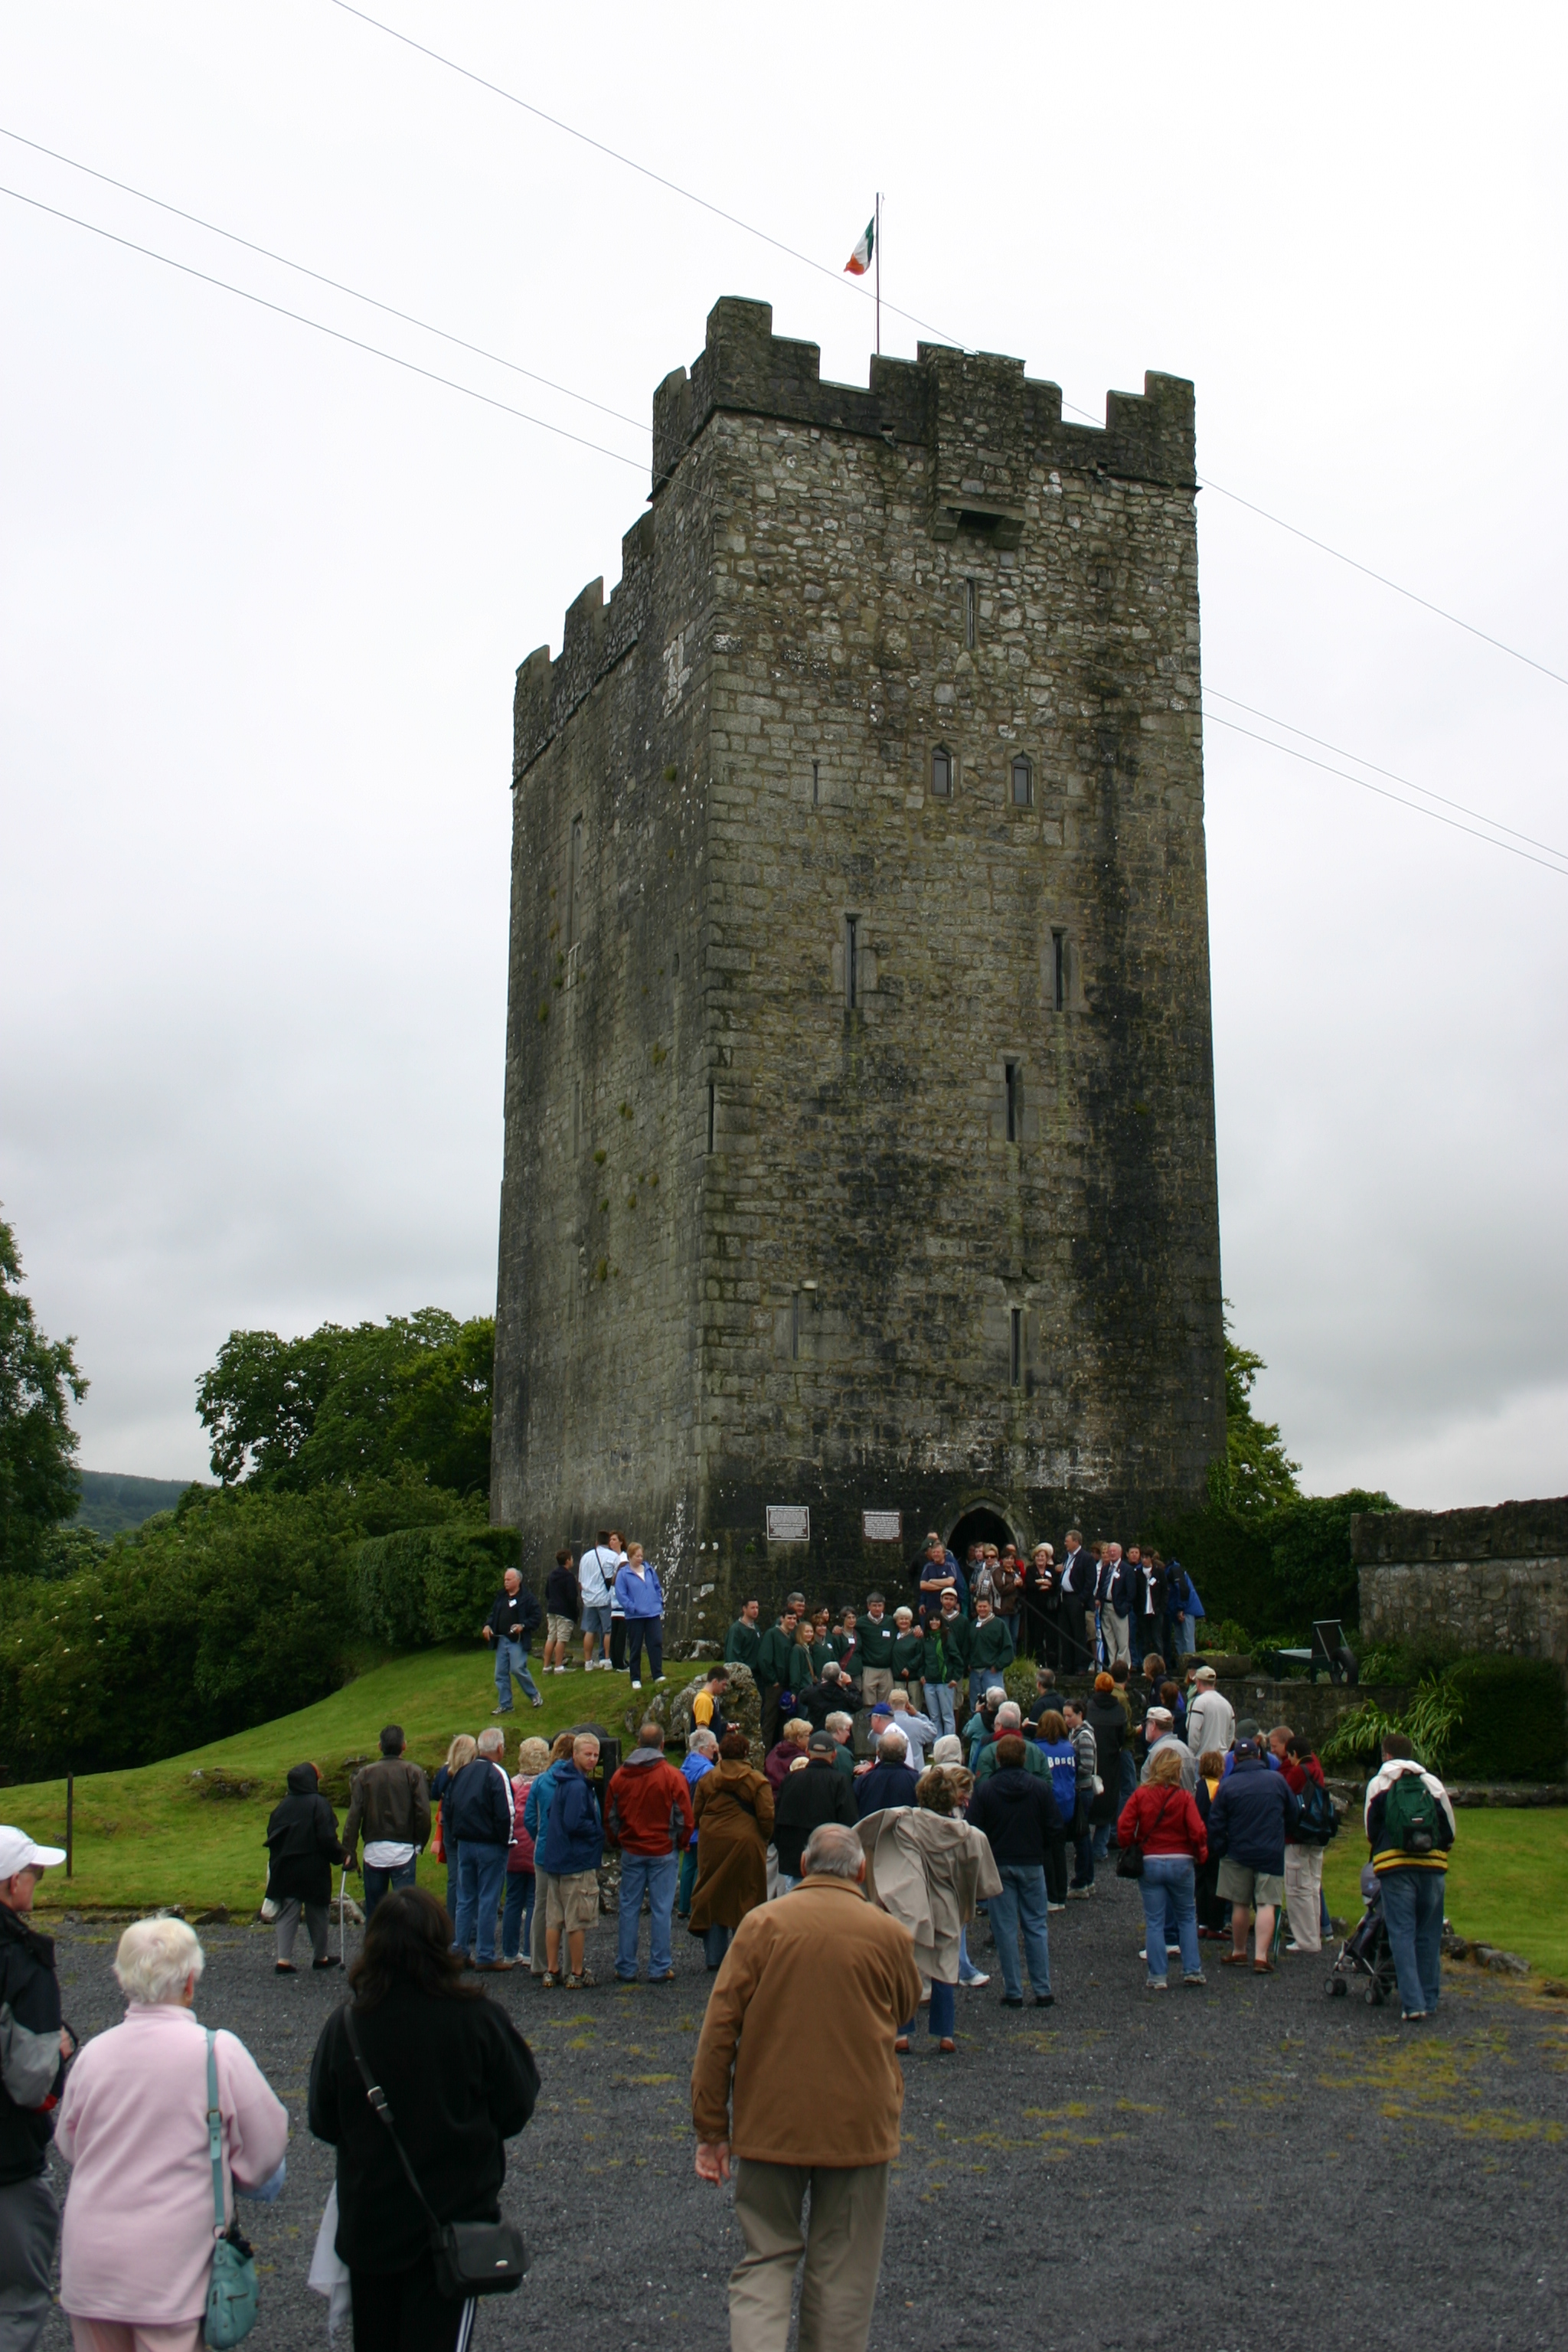 A Message from the Dysert O'Dea Castle Committee